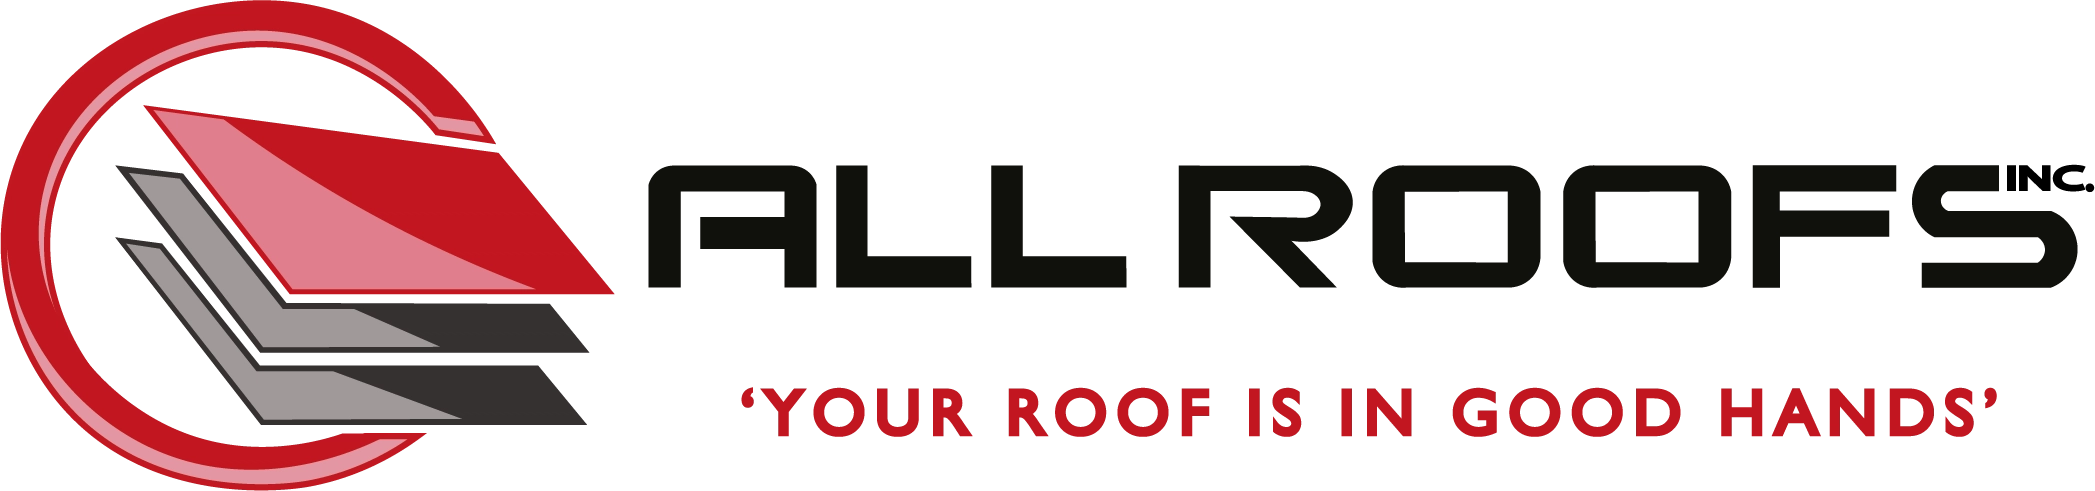 All Roofs, Inc Logo